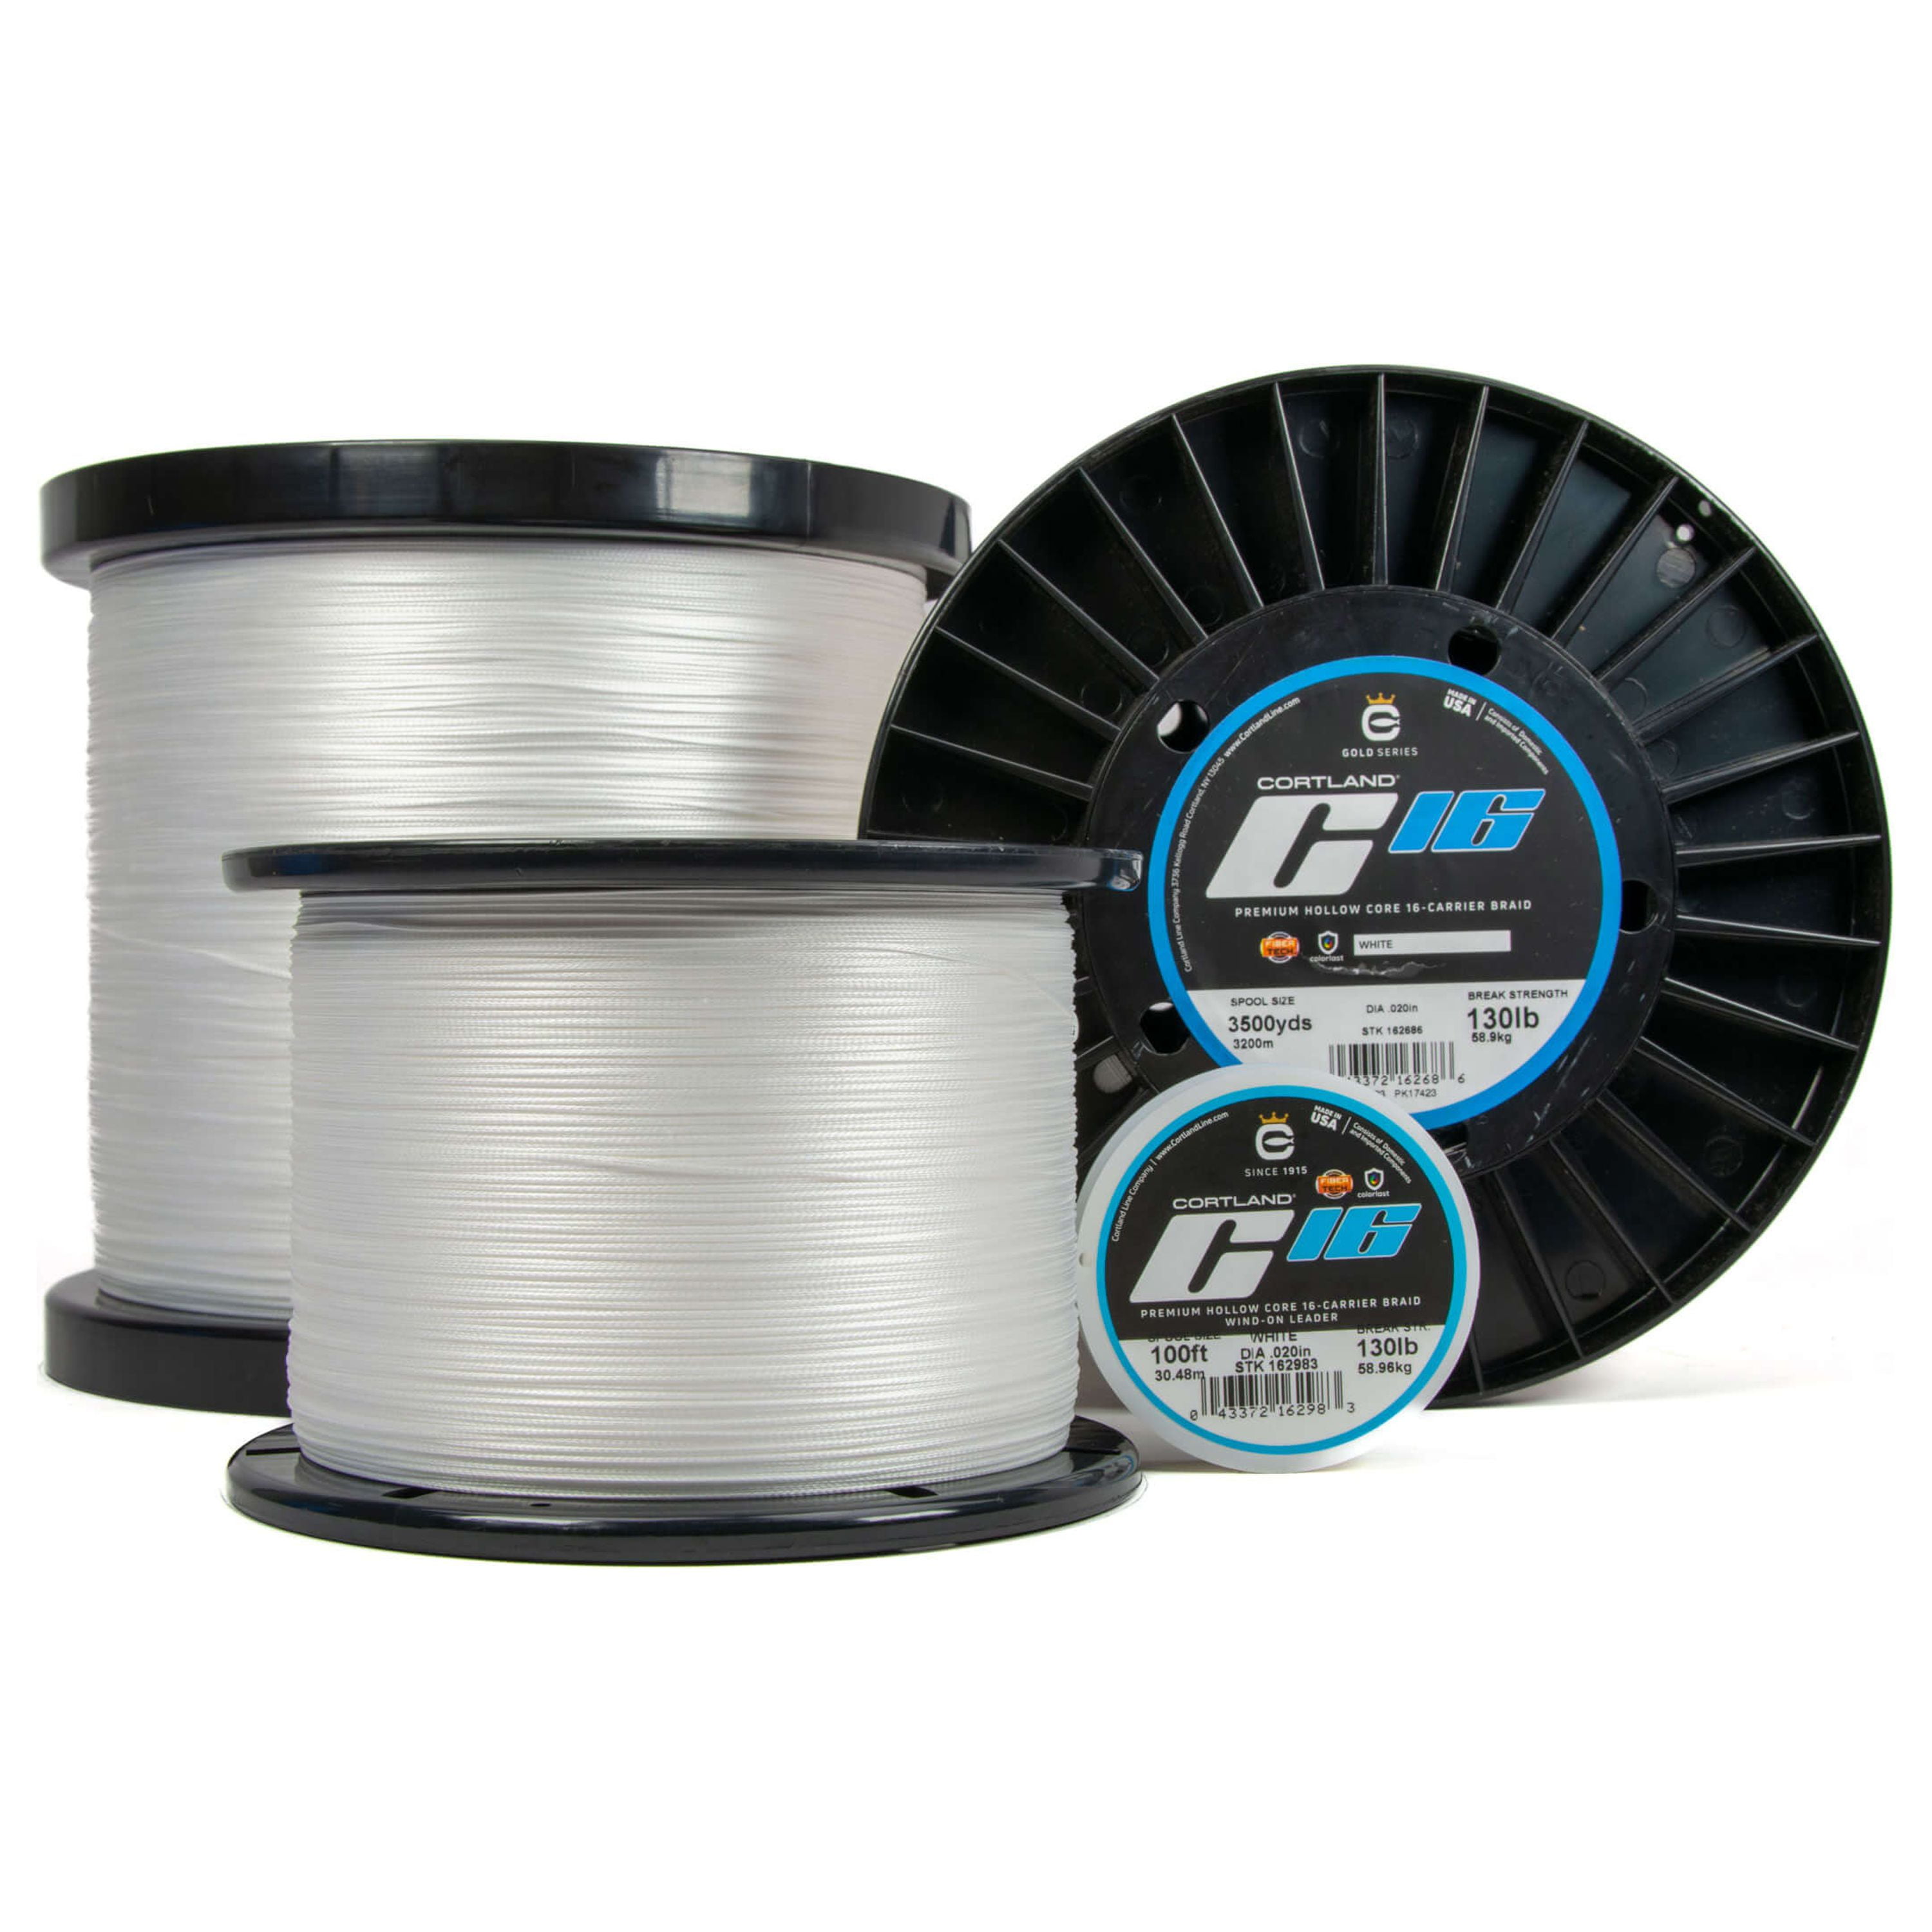 P-Line Floroclear Fishing Line, Clear, 3 lb. Test, 300yds 